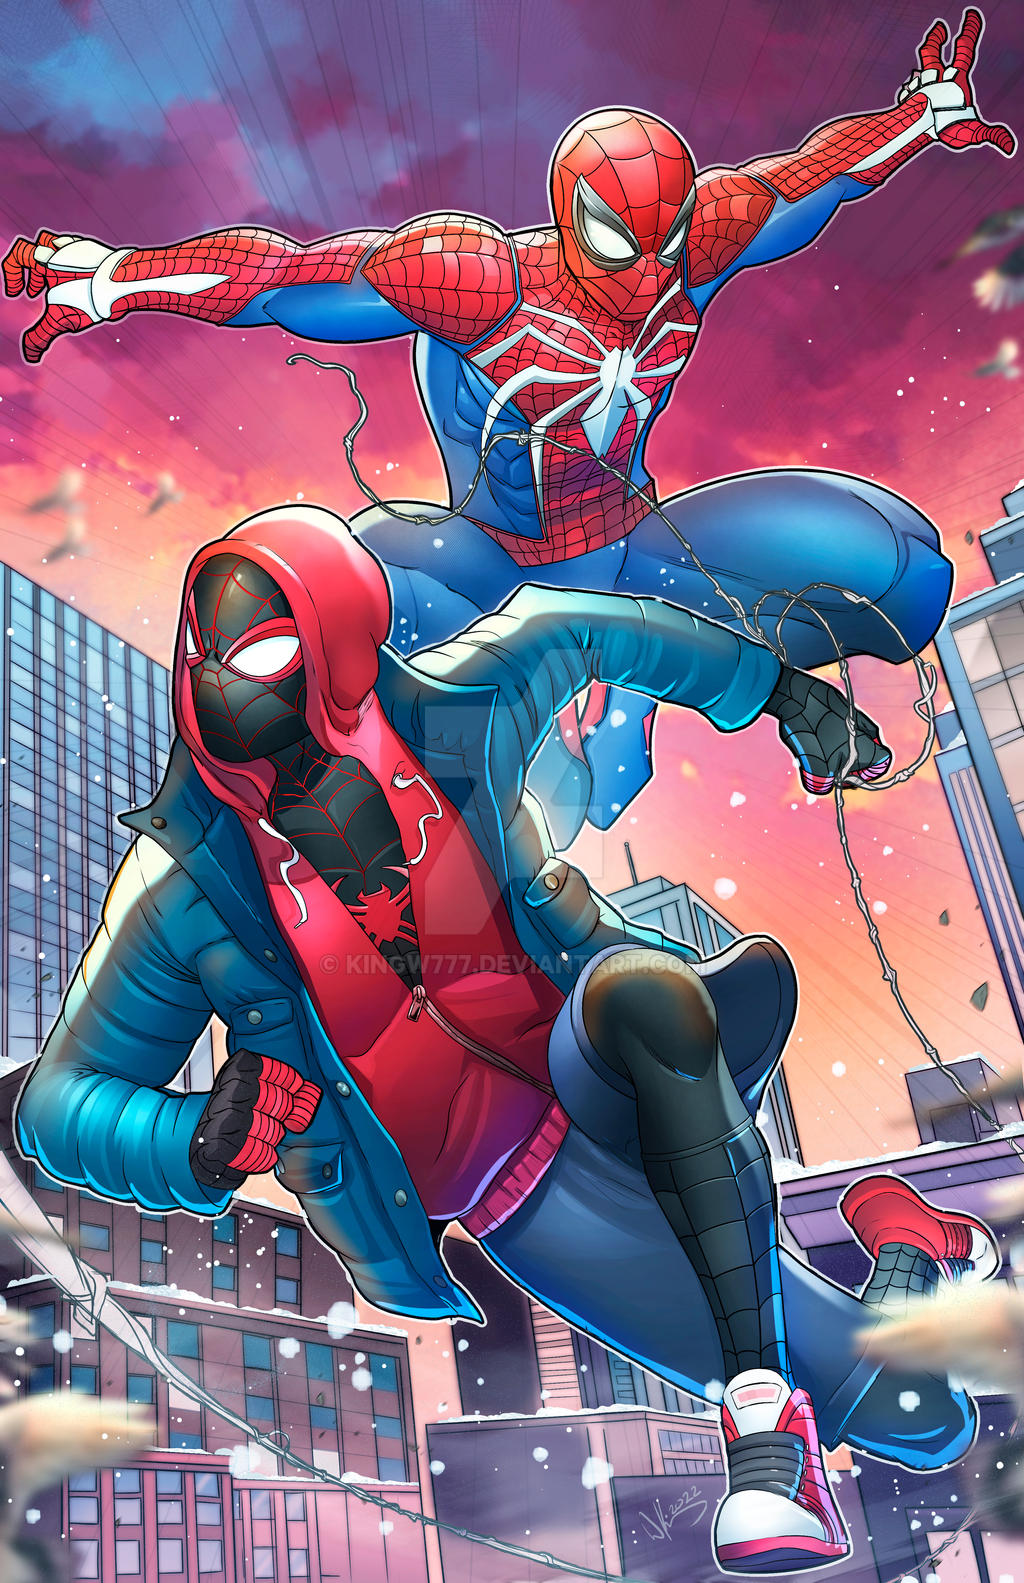 Mile and spiderman ps5 2022 update by Kingw777 on DeviantArt